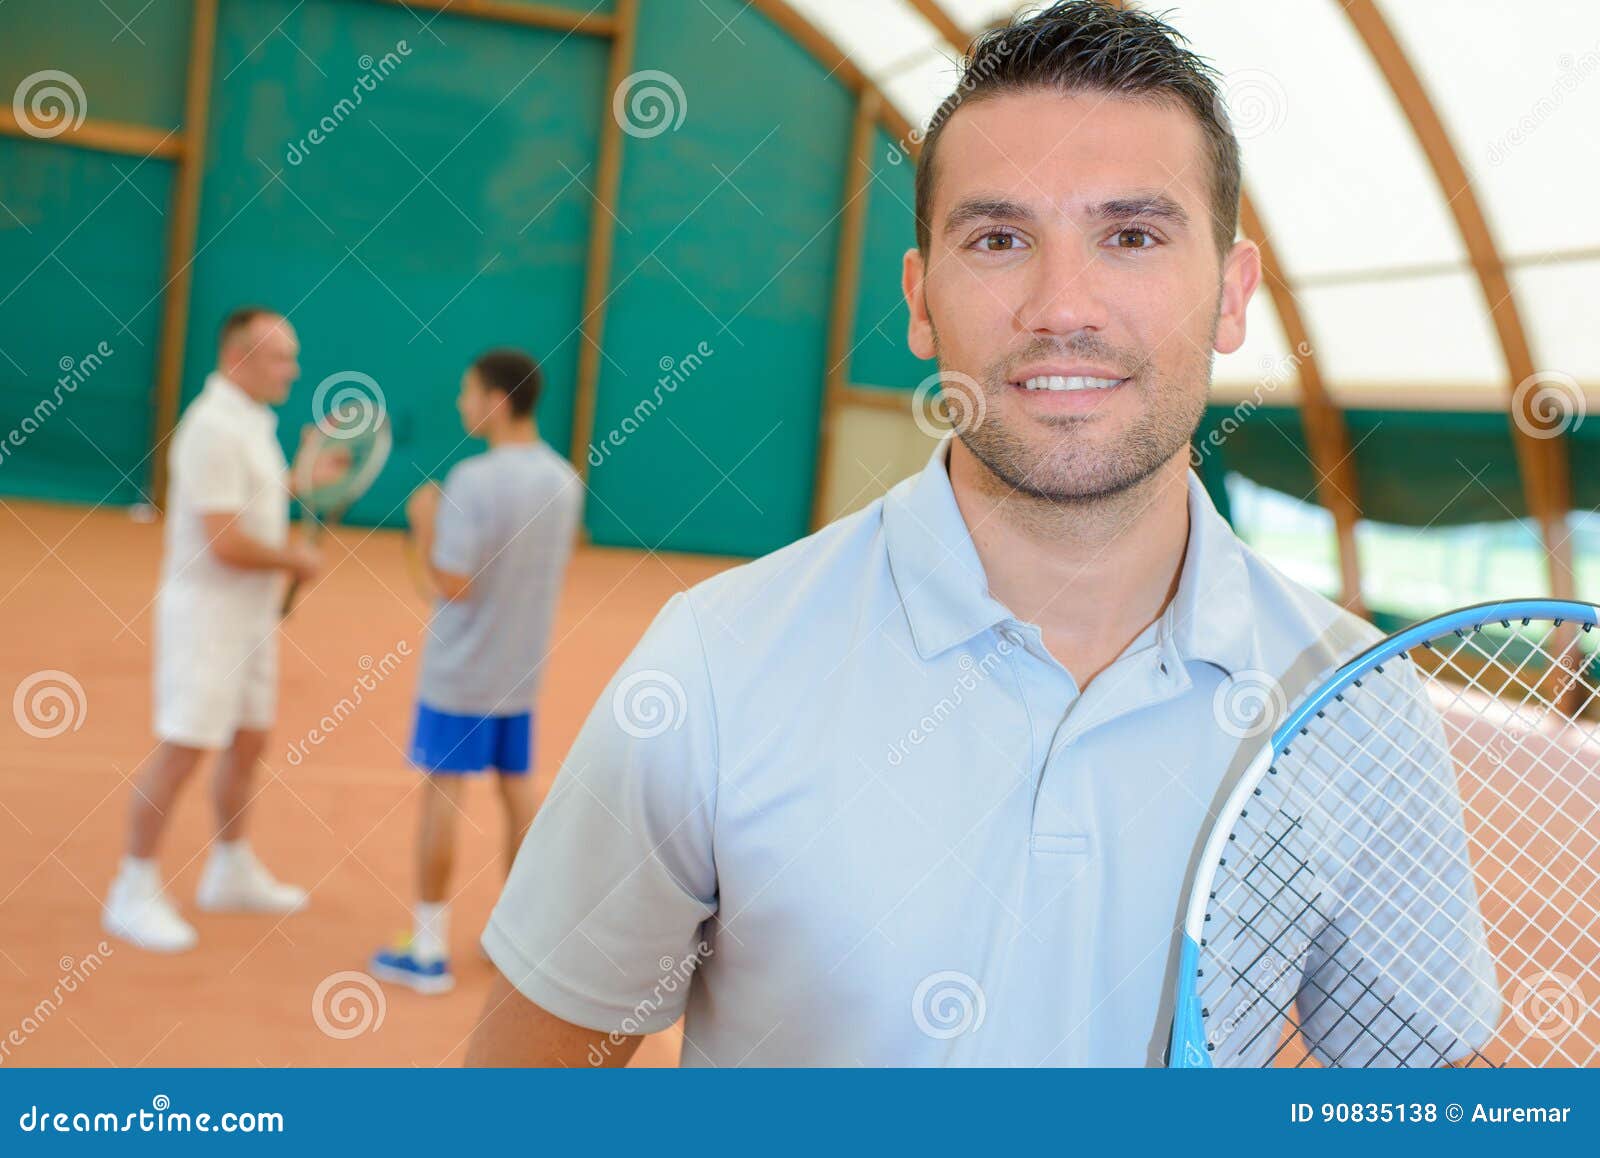 Man In Tennis Court Stock Photo Image Of Serve Service 90835138